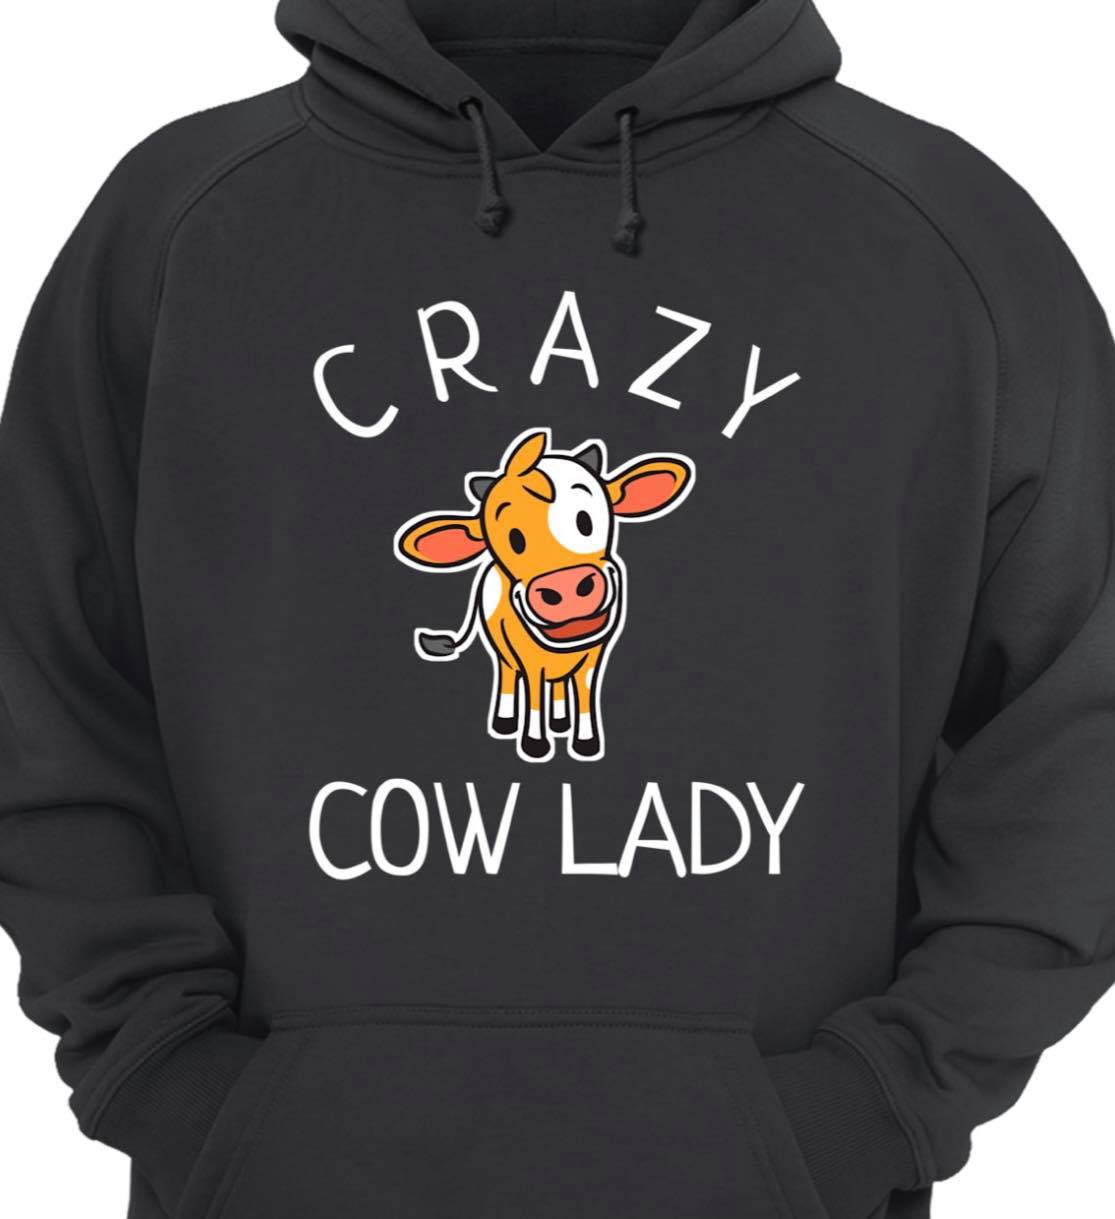 Crazy cow lady - Cow lover